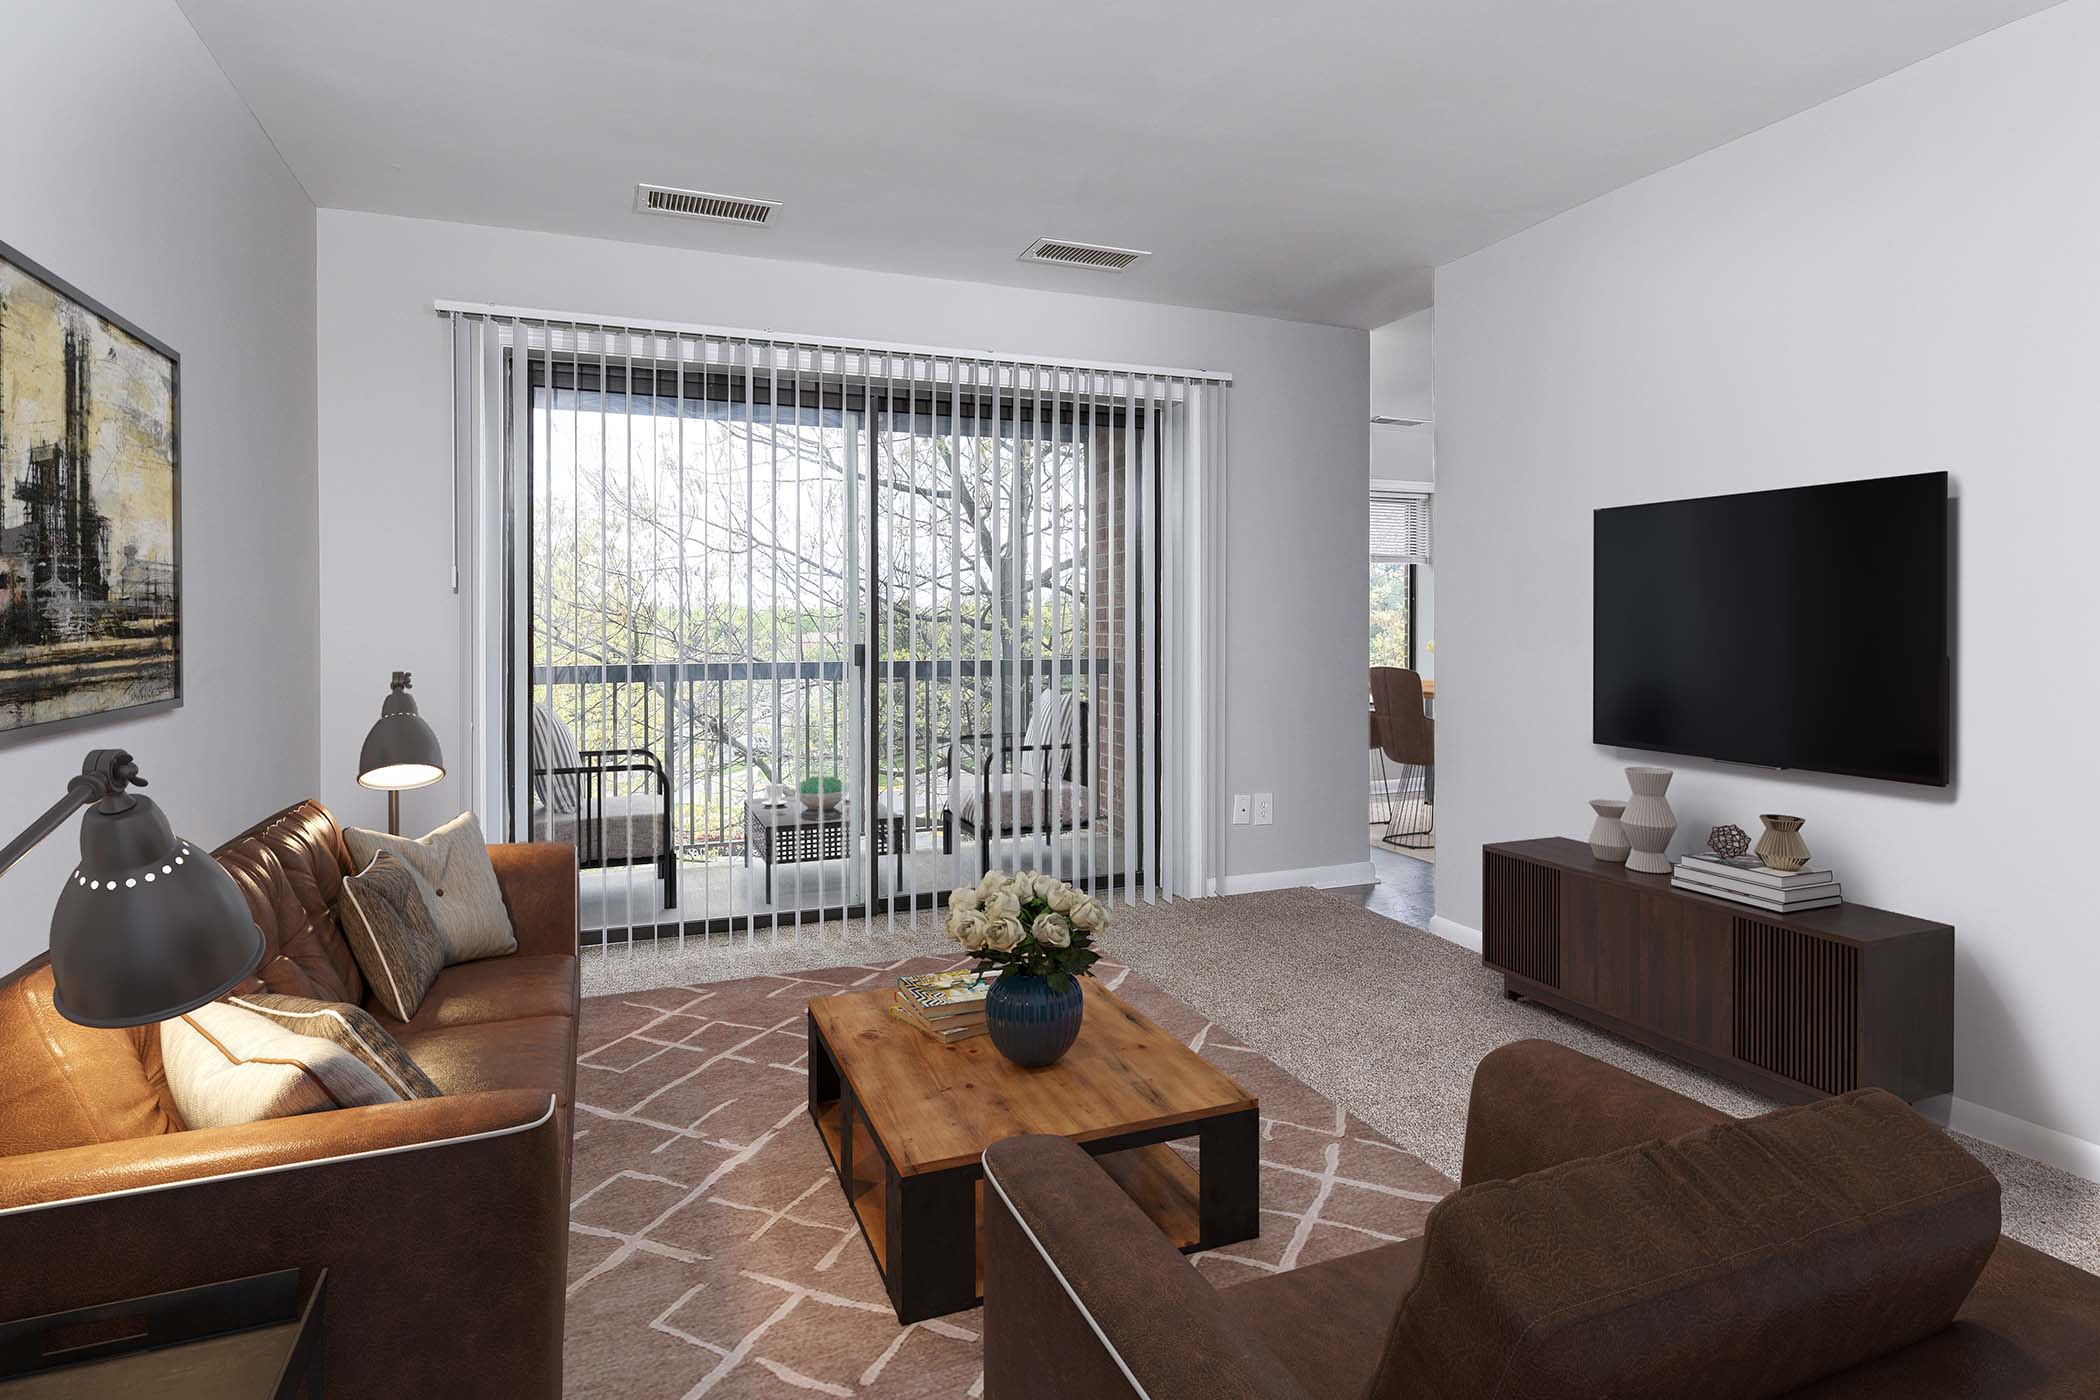 Living room at The Flats at Columbia Pike, Silver Spring, Maryland